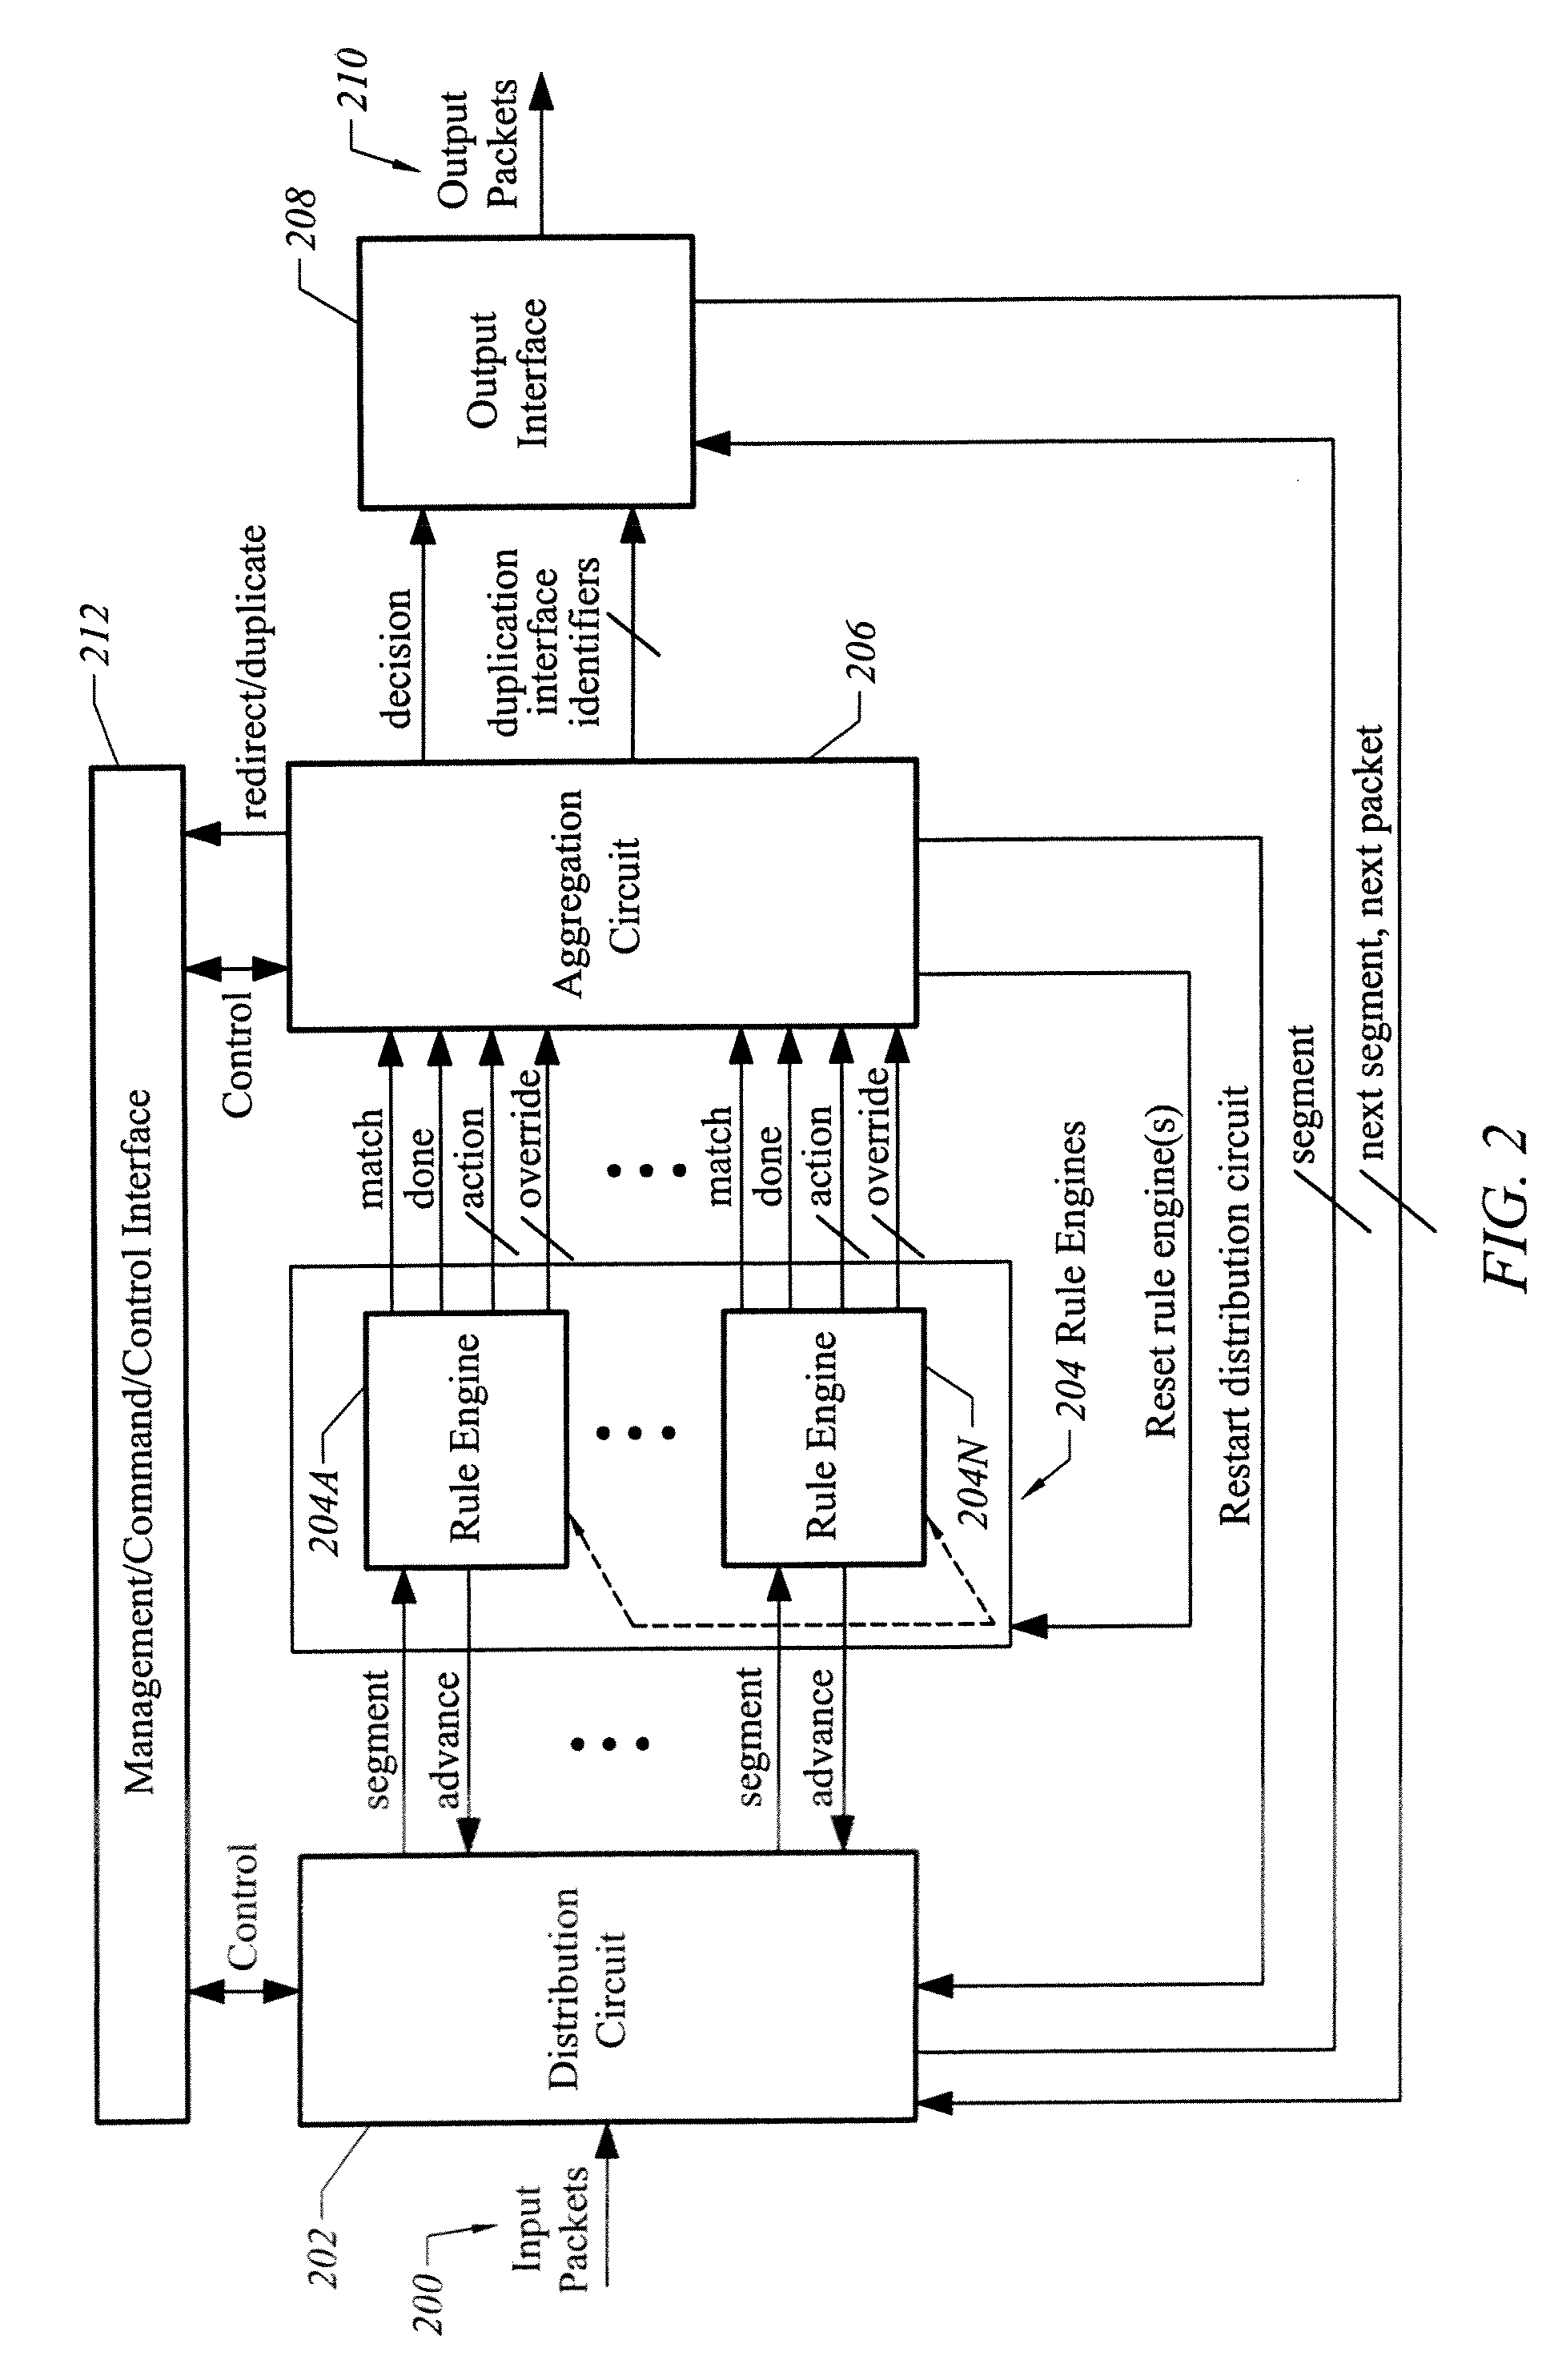 Apparatus and method for facilitating network security with granular traffic modifications